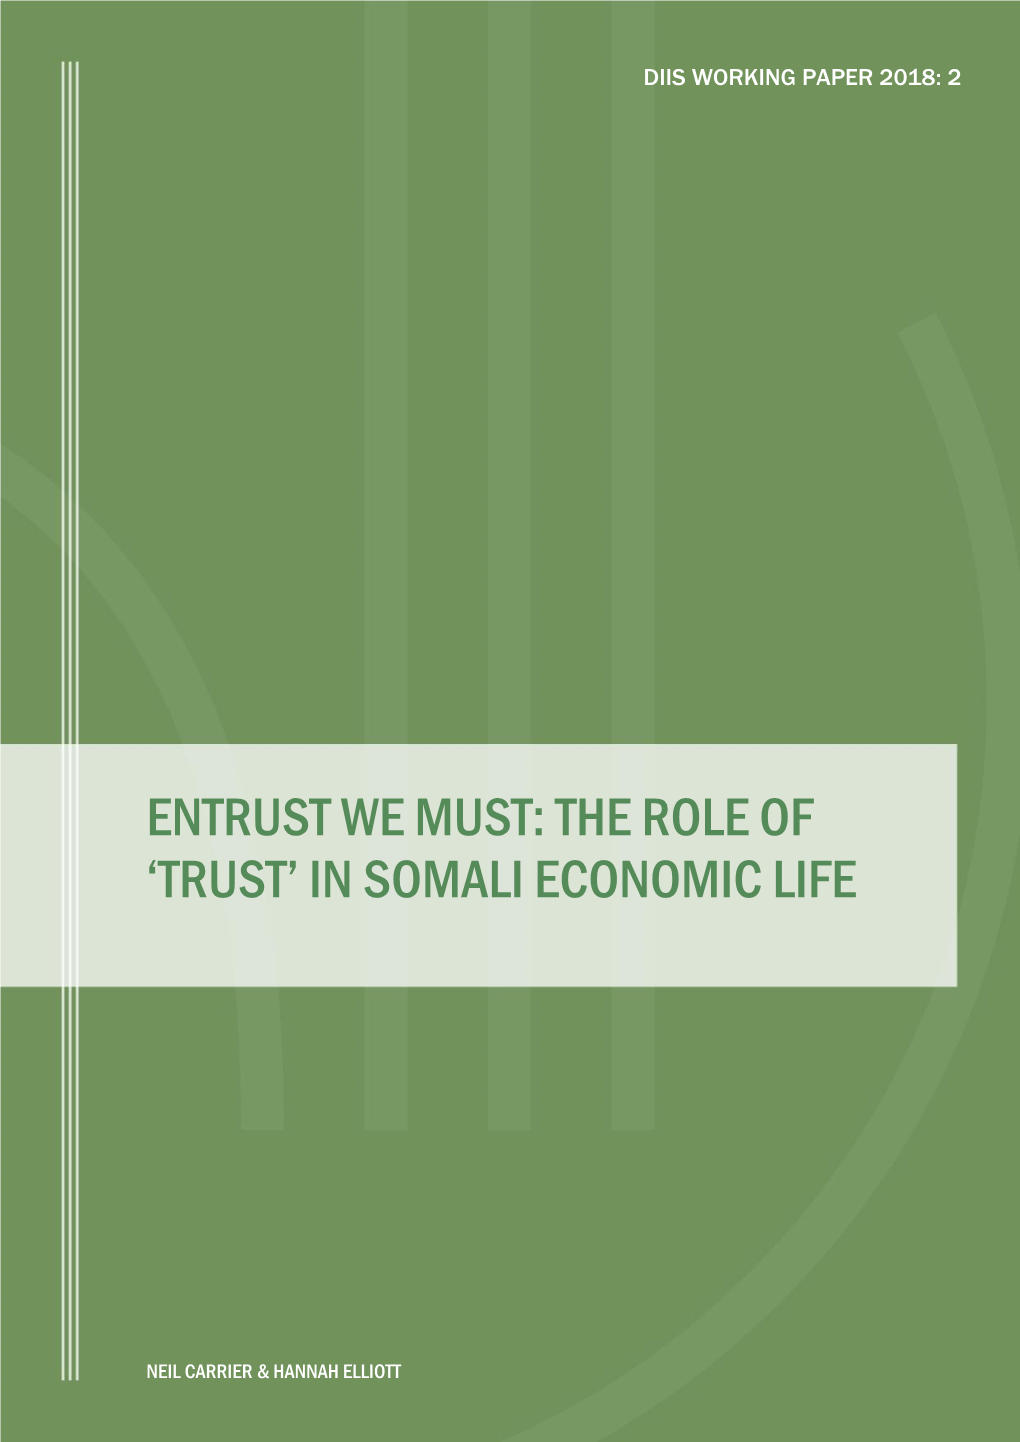 Entrust We Must: the Role of 'Trust' in Somali Economic Life